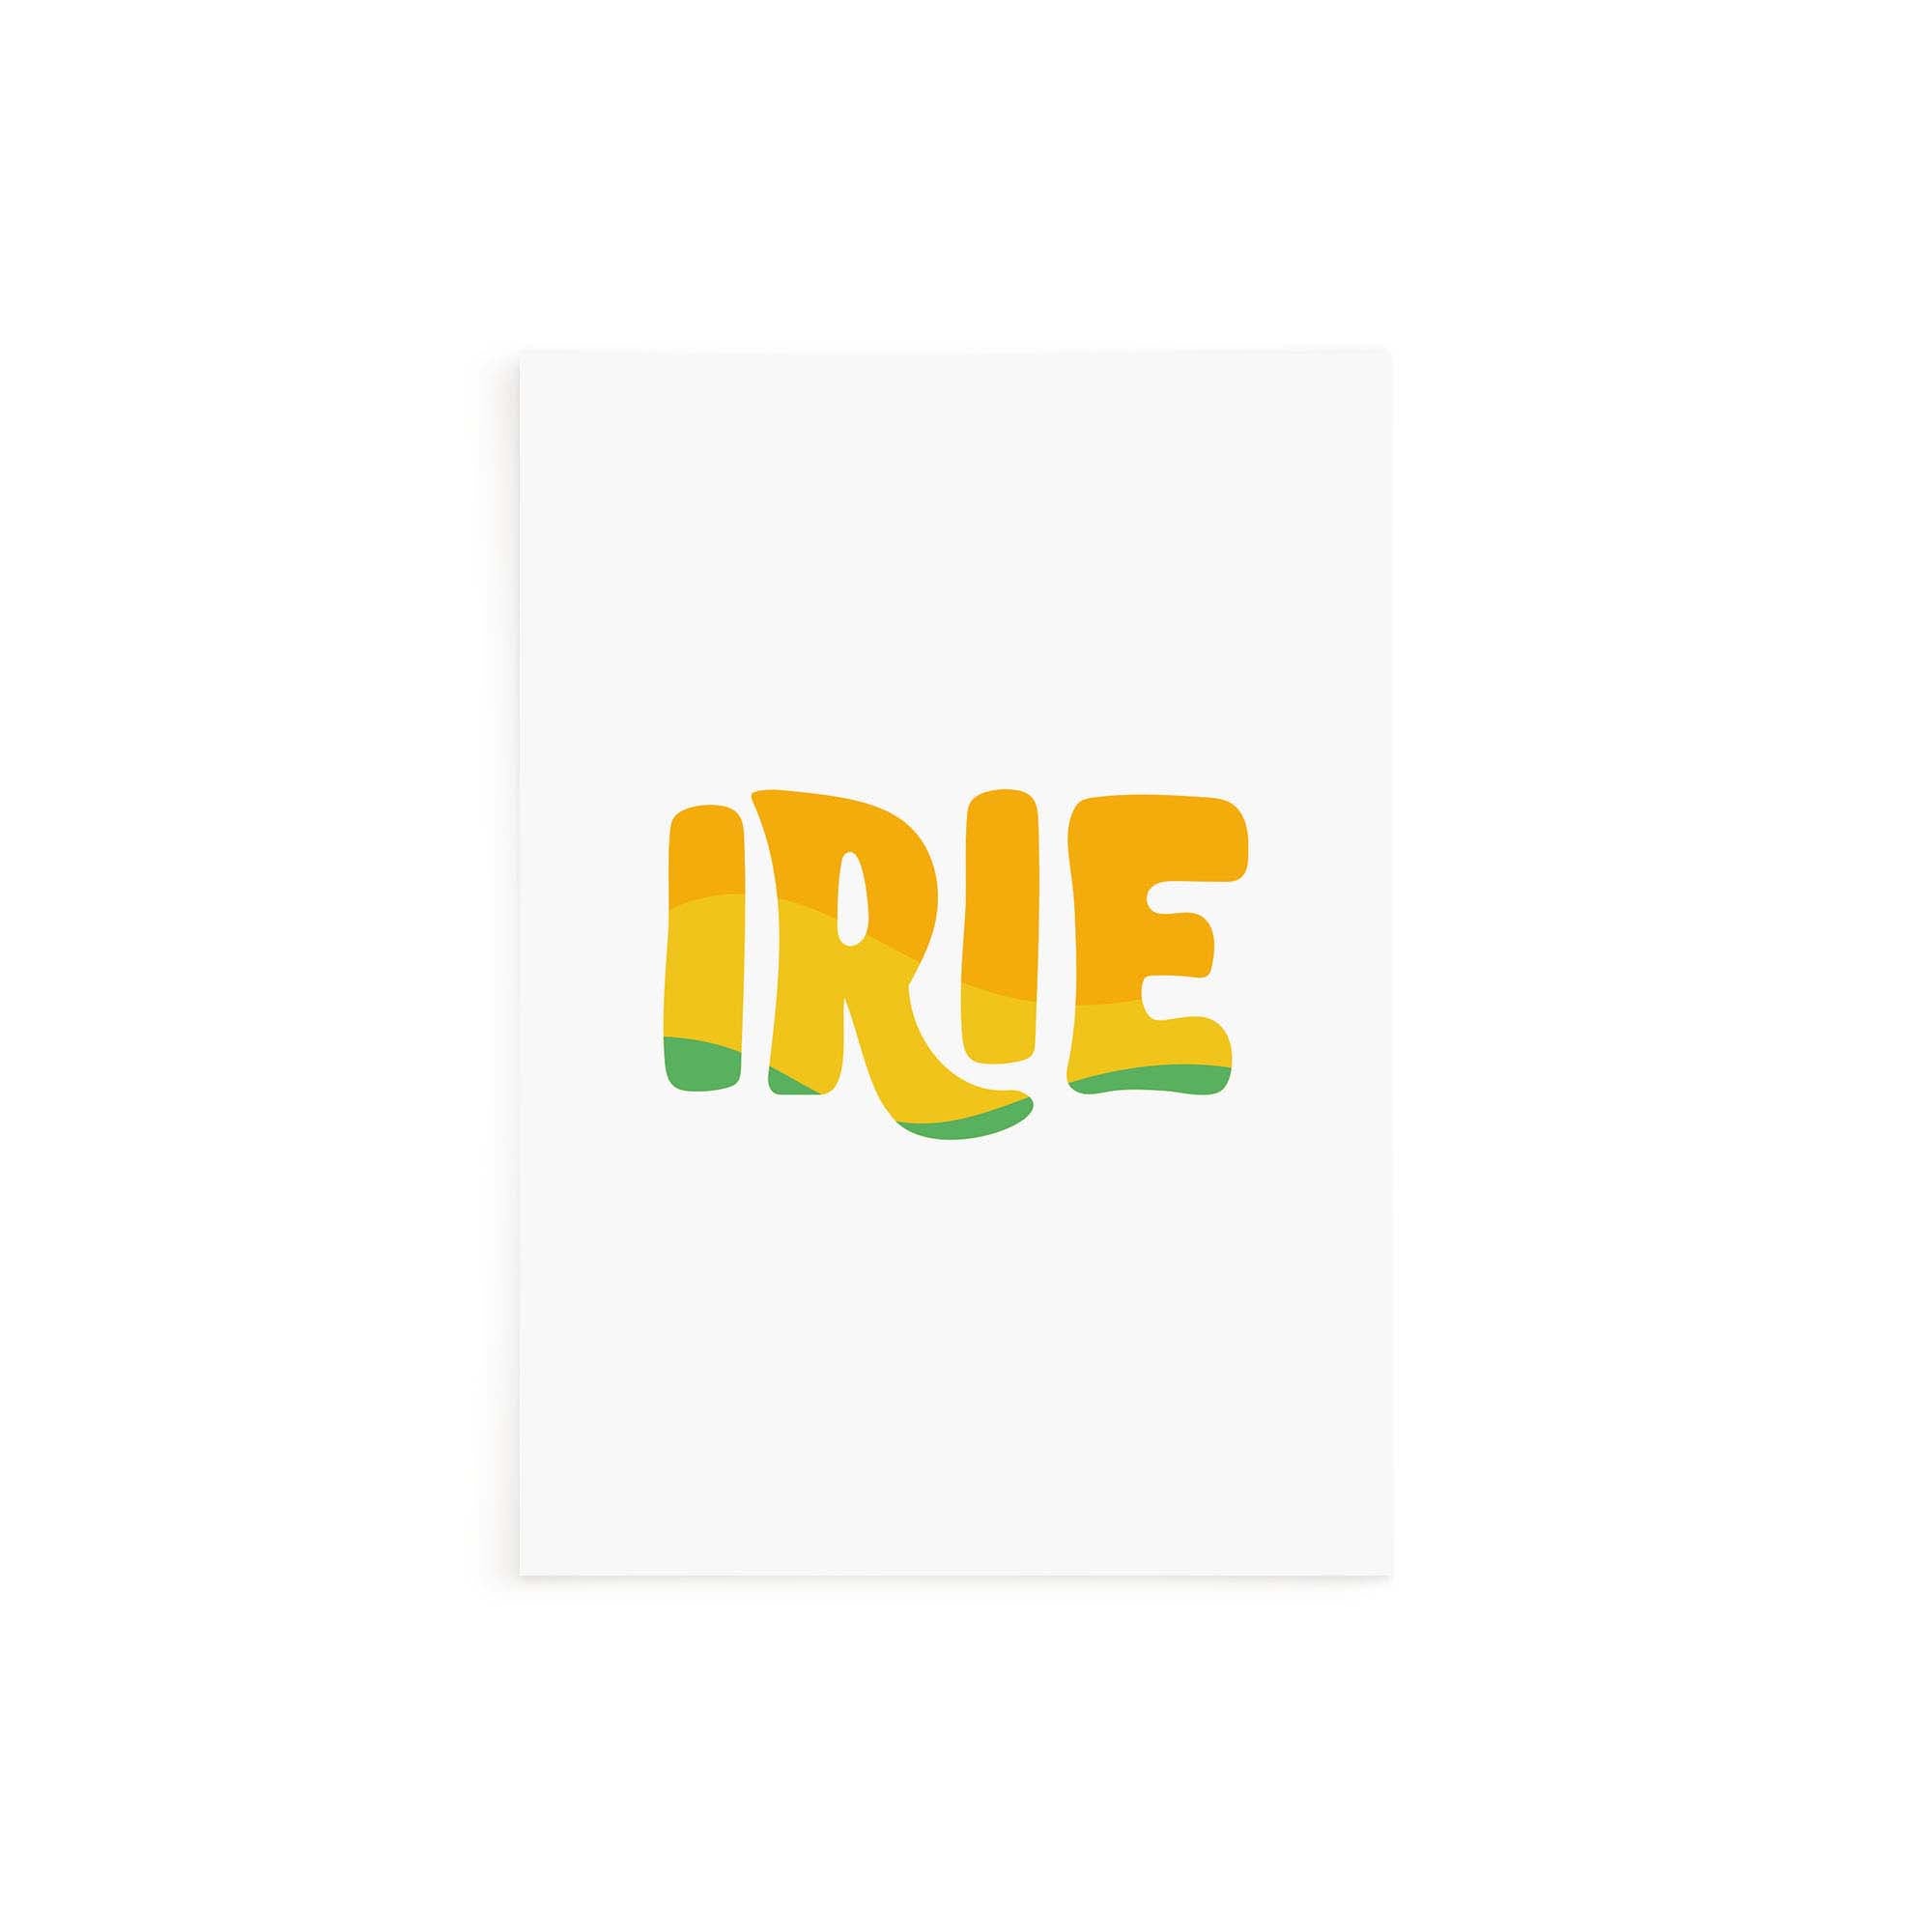 what does irie mean in jamaica